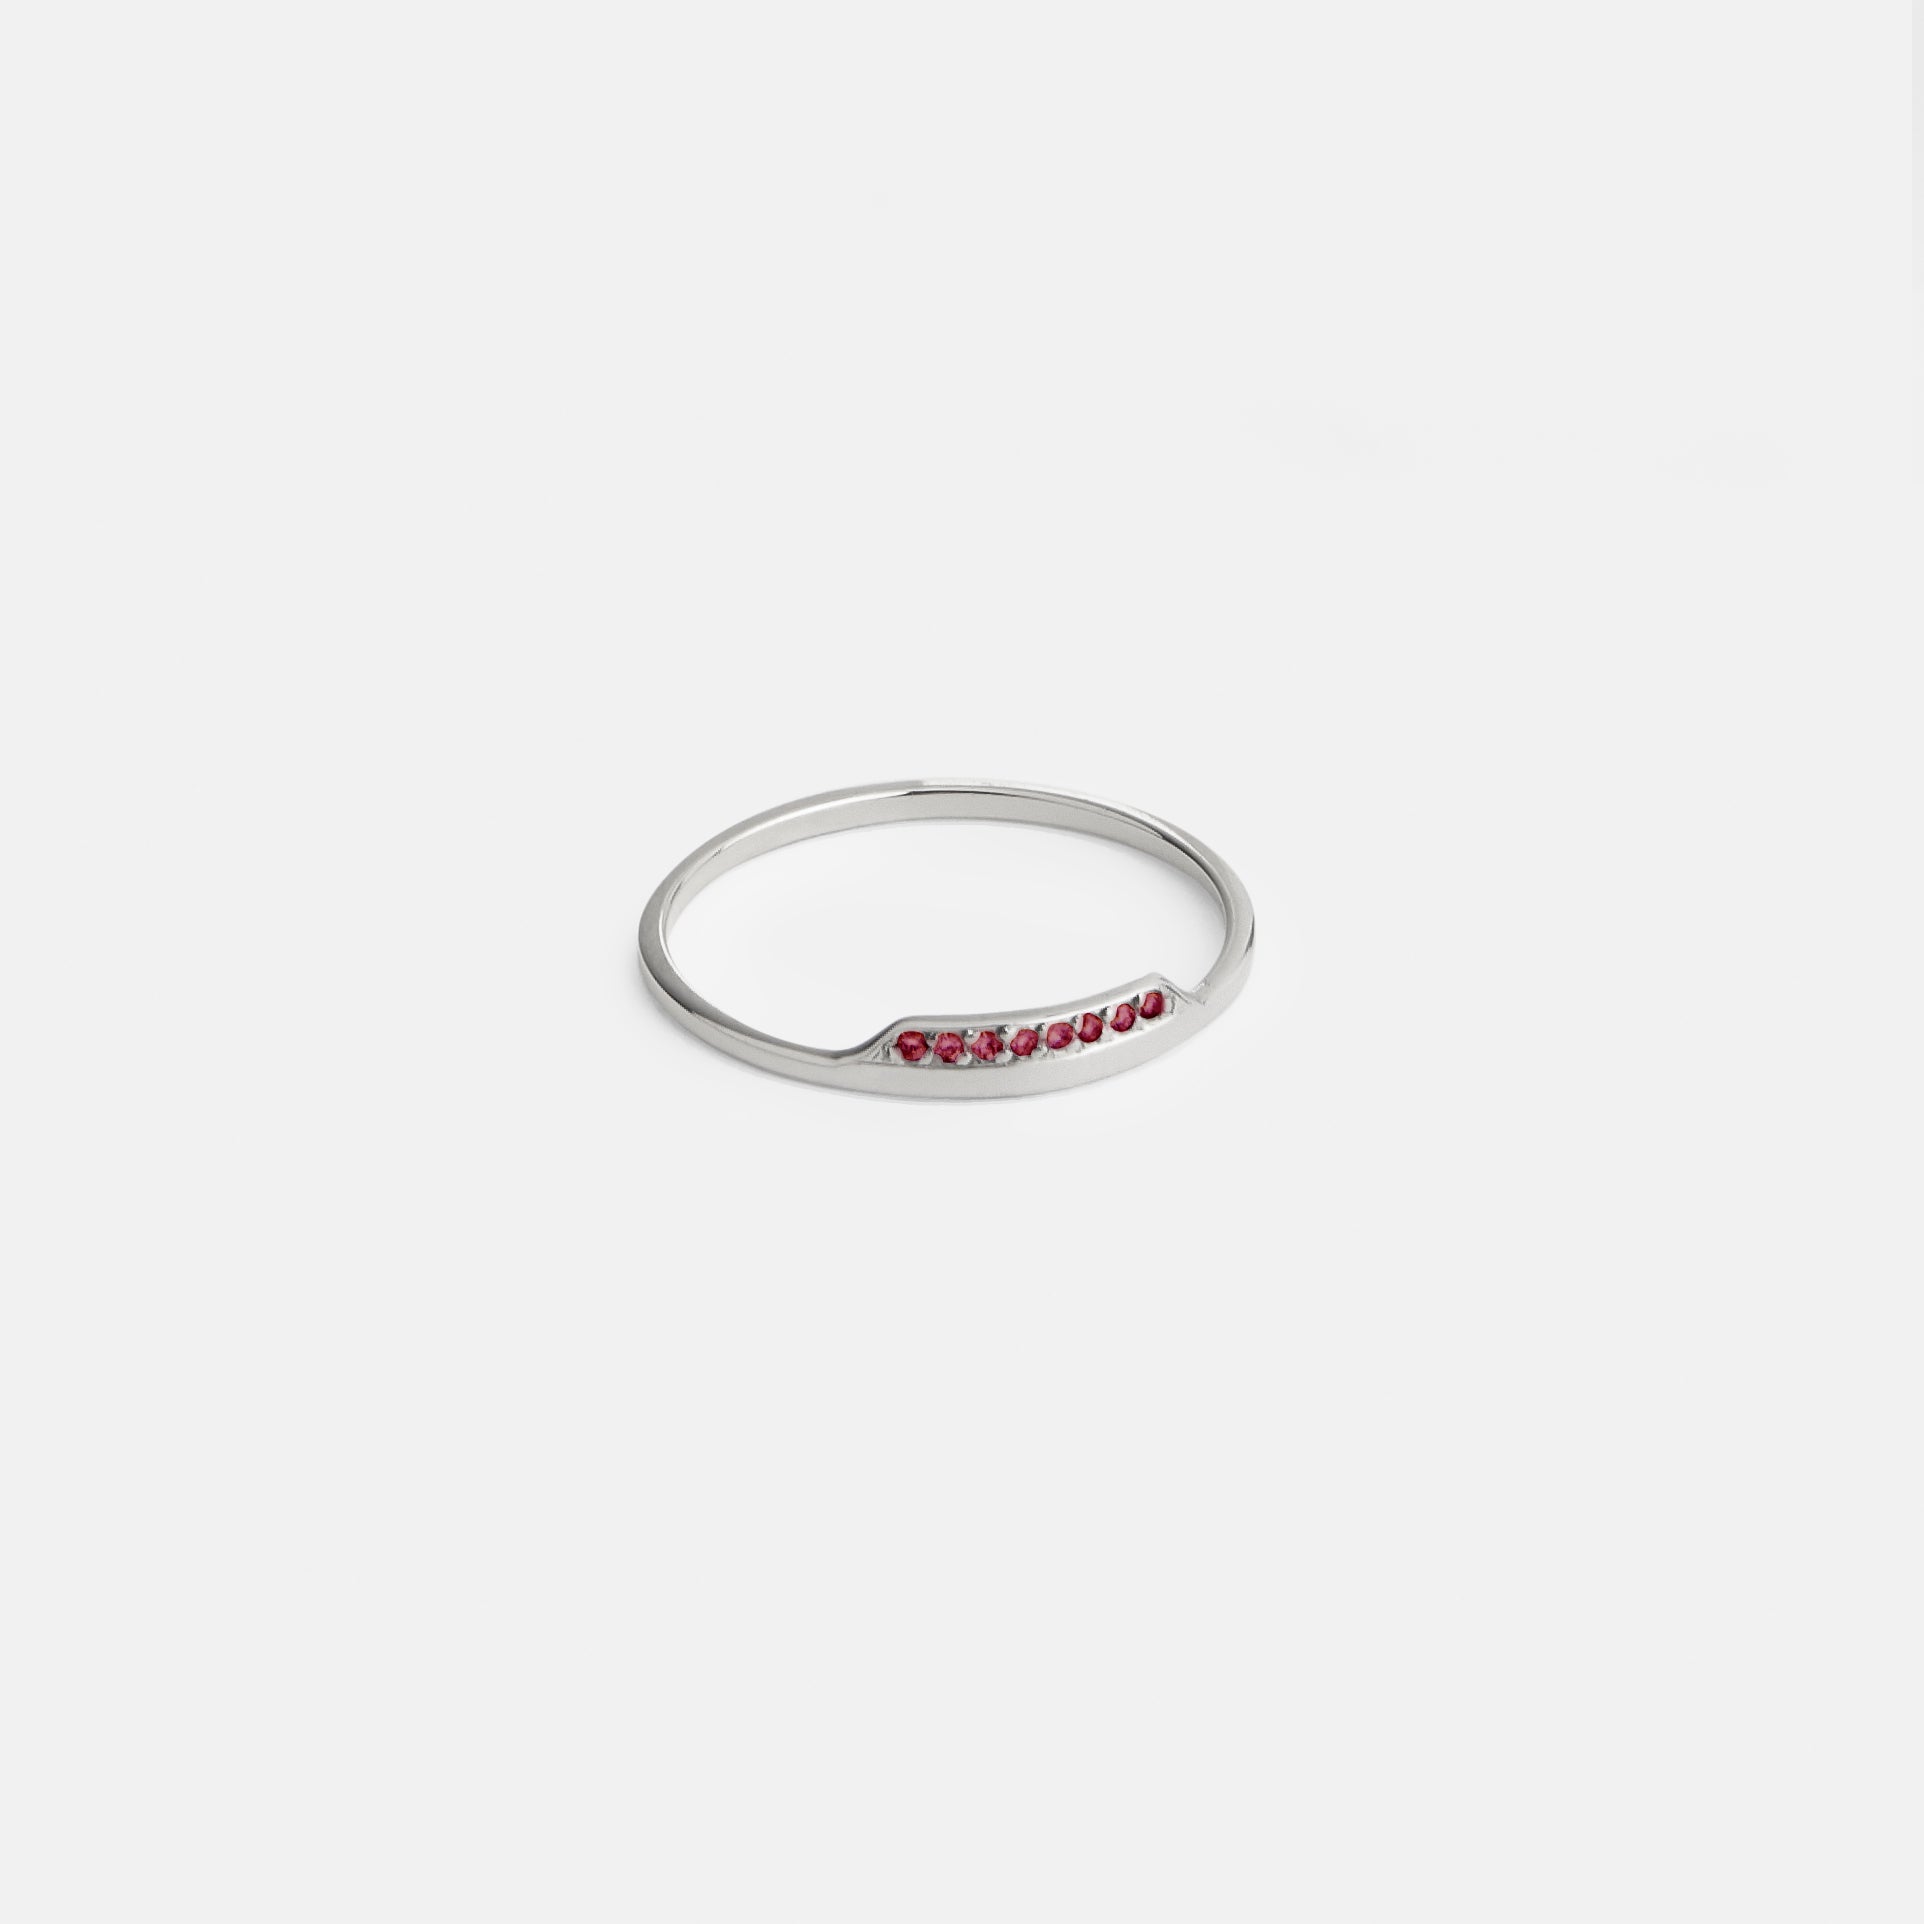 Salo Thin Ring in 14k White Gold set with Rubies By SHW Fine Jewelry NYC